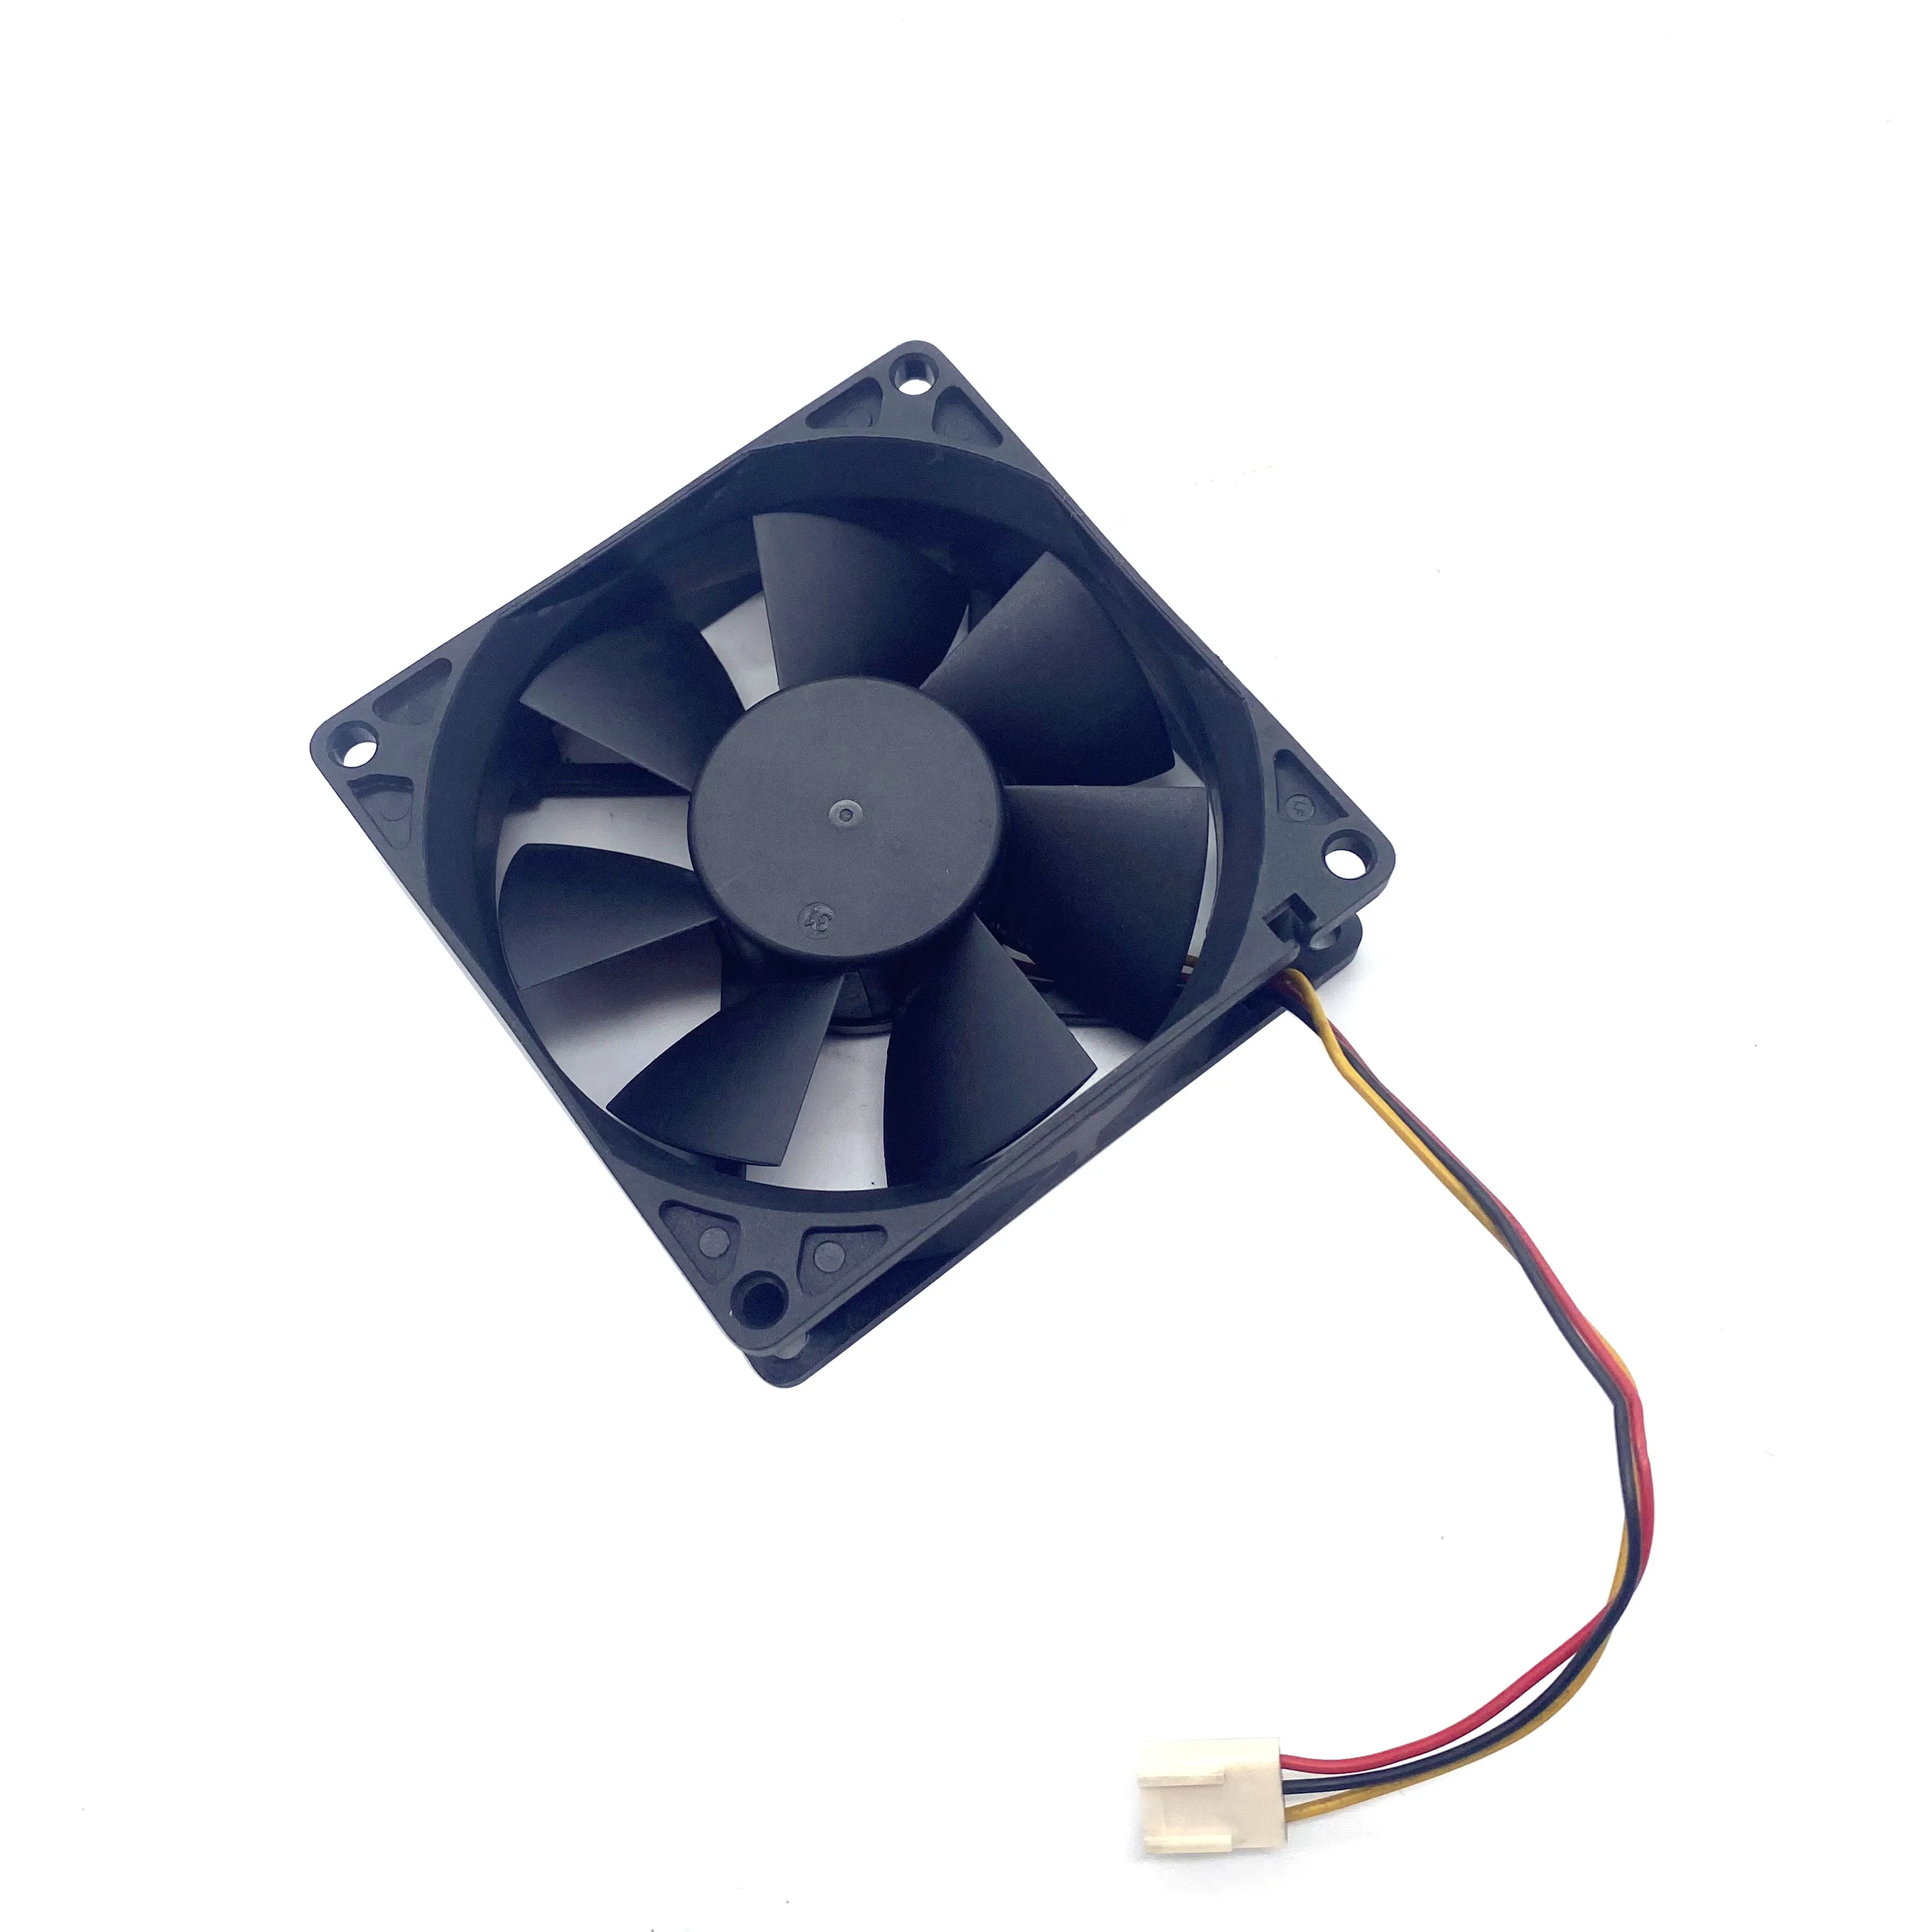 

CHA8012CS-A Cooling Case Fan Cpu 80mm 0.17A DC12V fits for HP T790 T795 T1300 T2300 T770 T1200